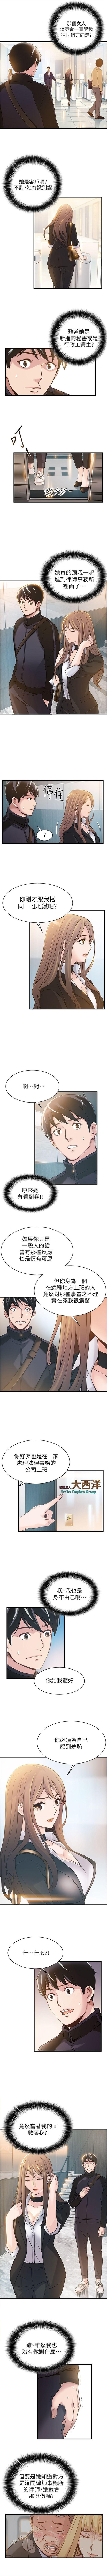 Live 弱點 1-101 官方中文（連載中） Shower - Page 11